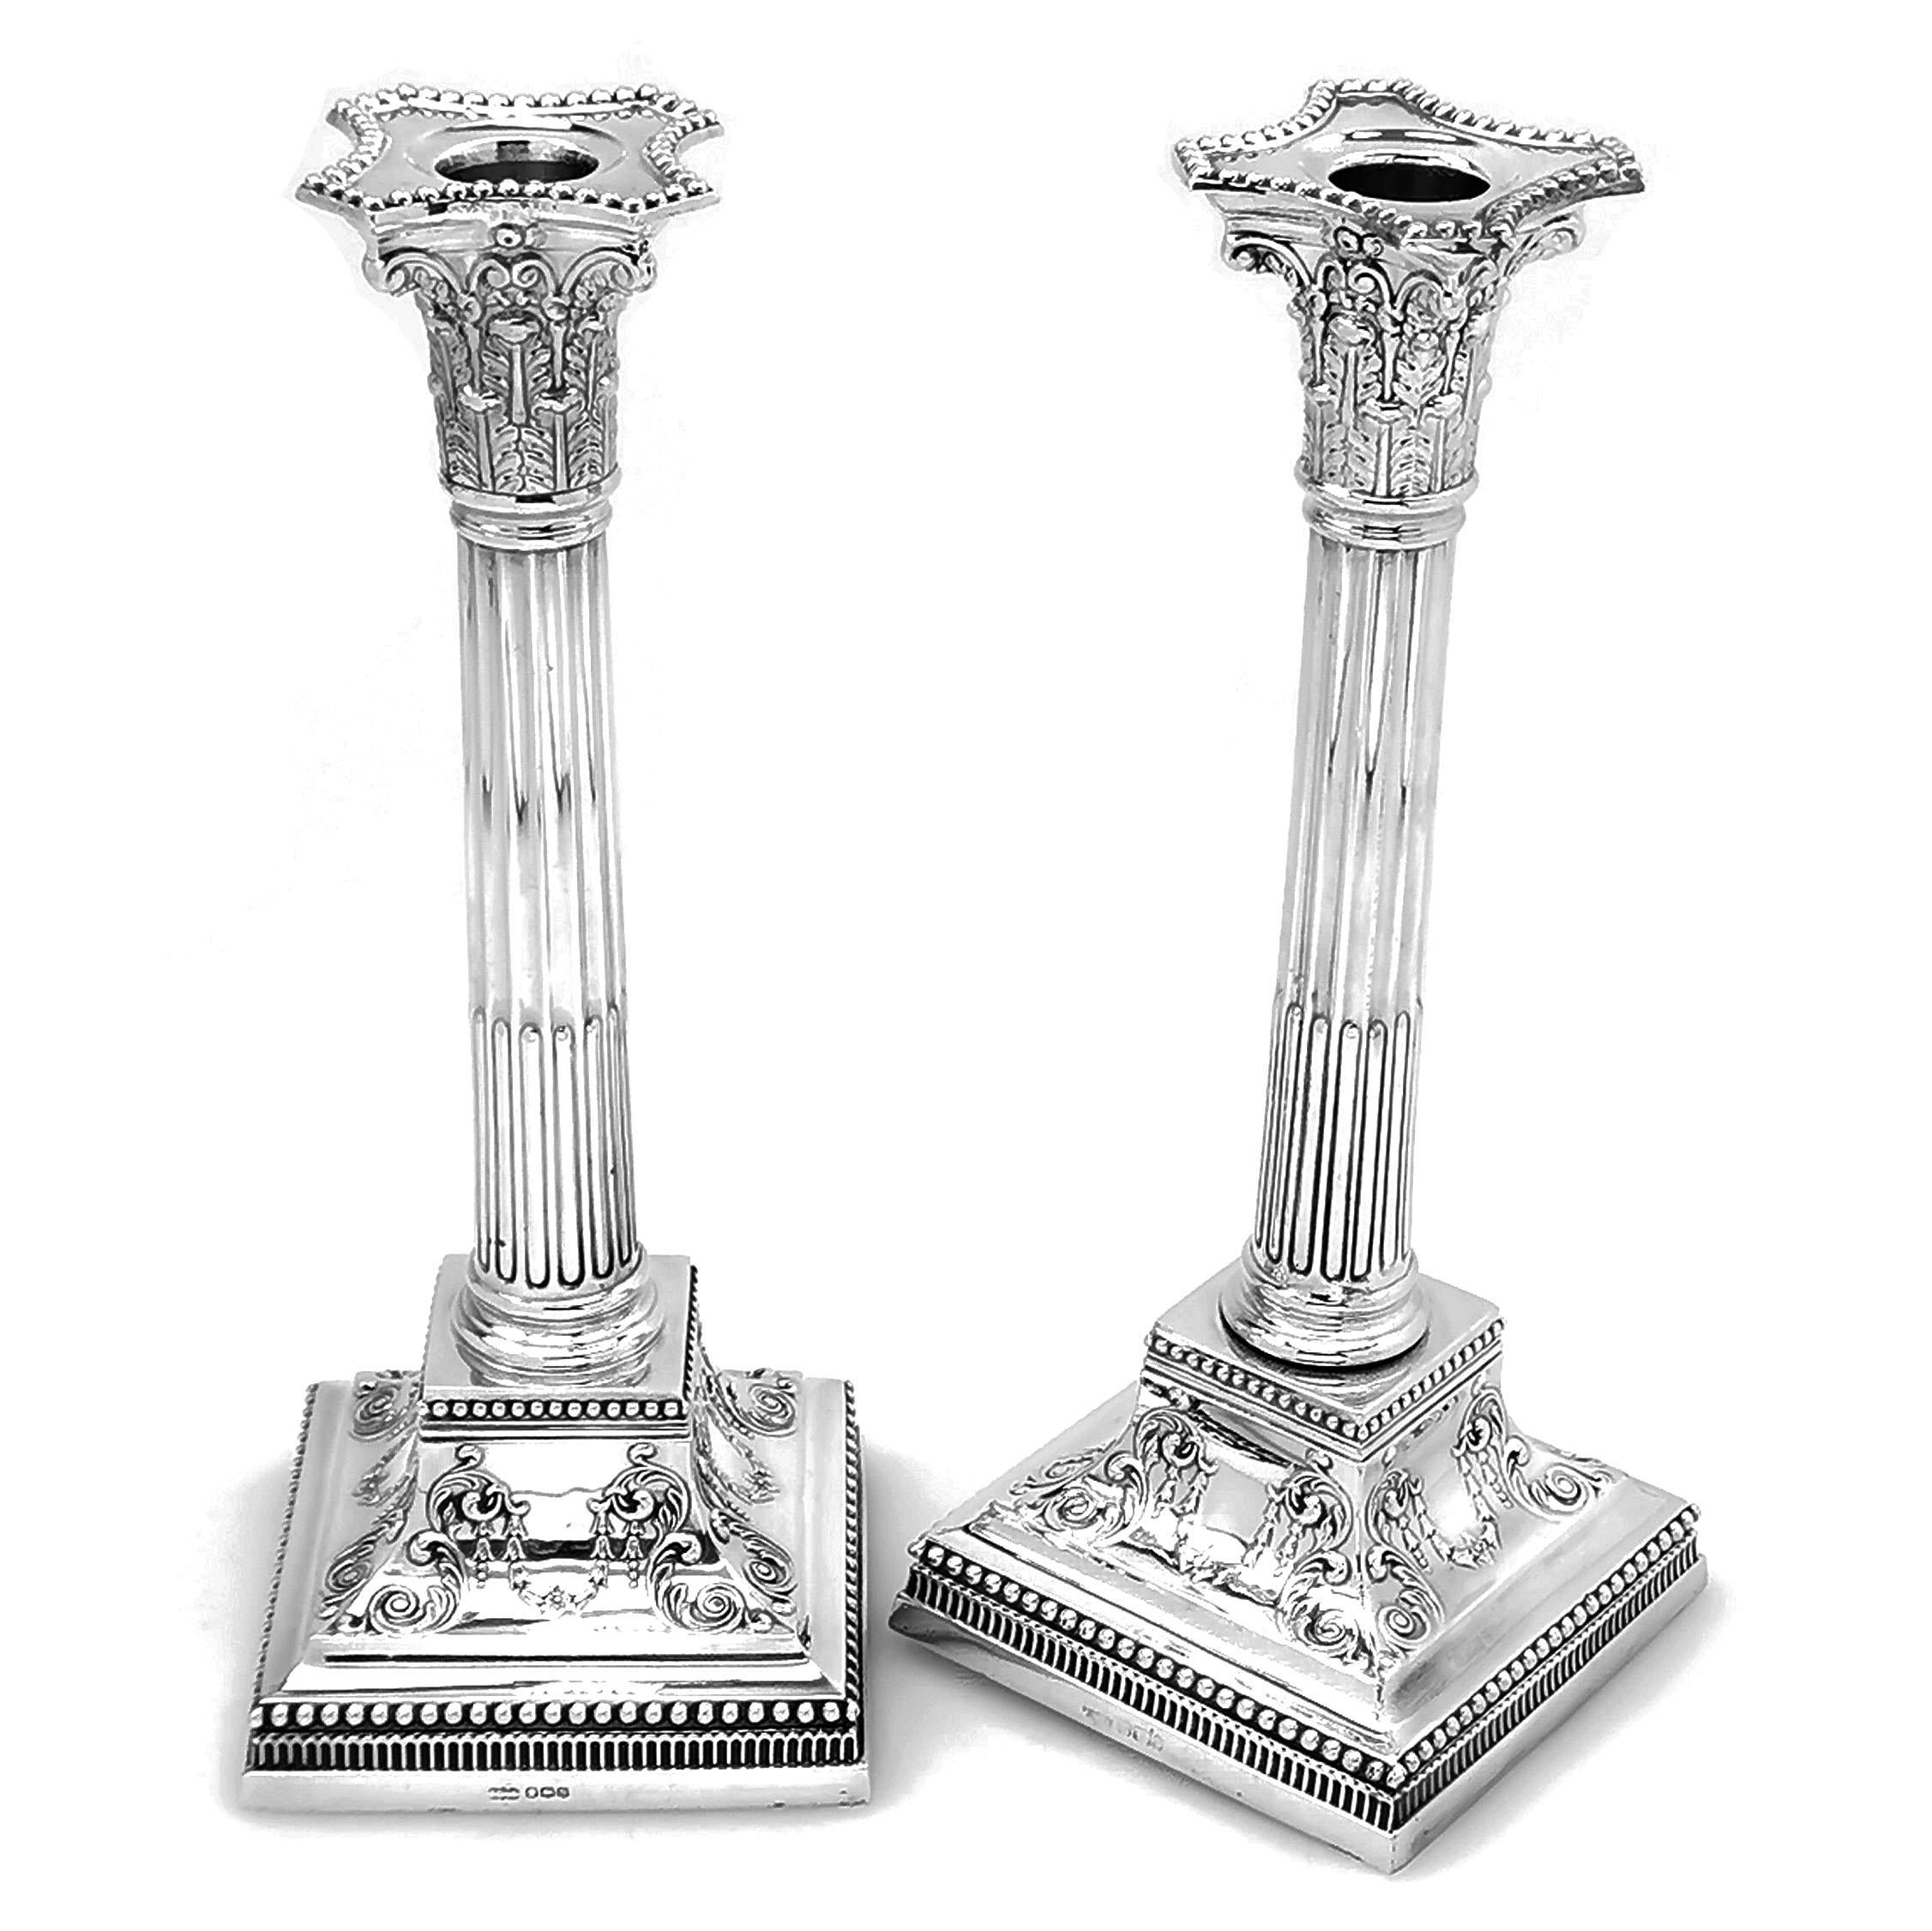 A pair of Antique sterling Silver Candlesticks in a classic Corinthian column design. These Candlesticks have square bases decorated with pretty chased scroll patterning. The border of the square foot and the edging of the removable sconce have a